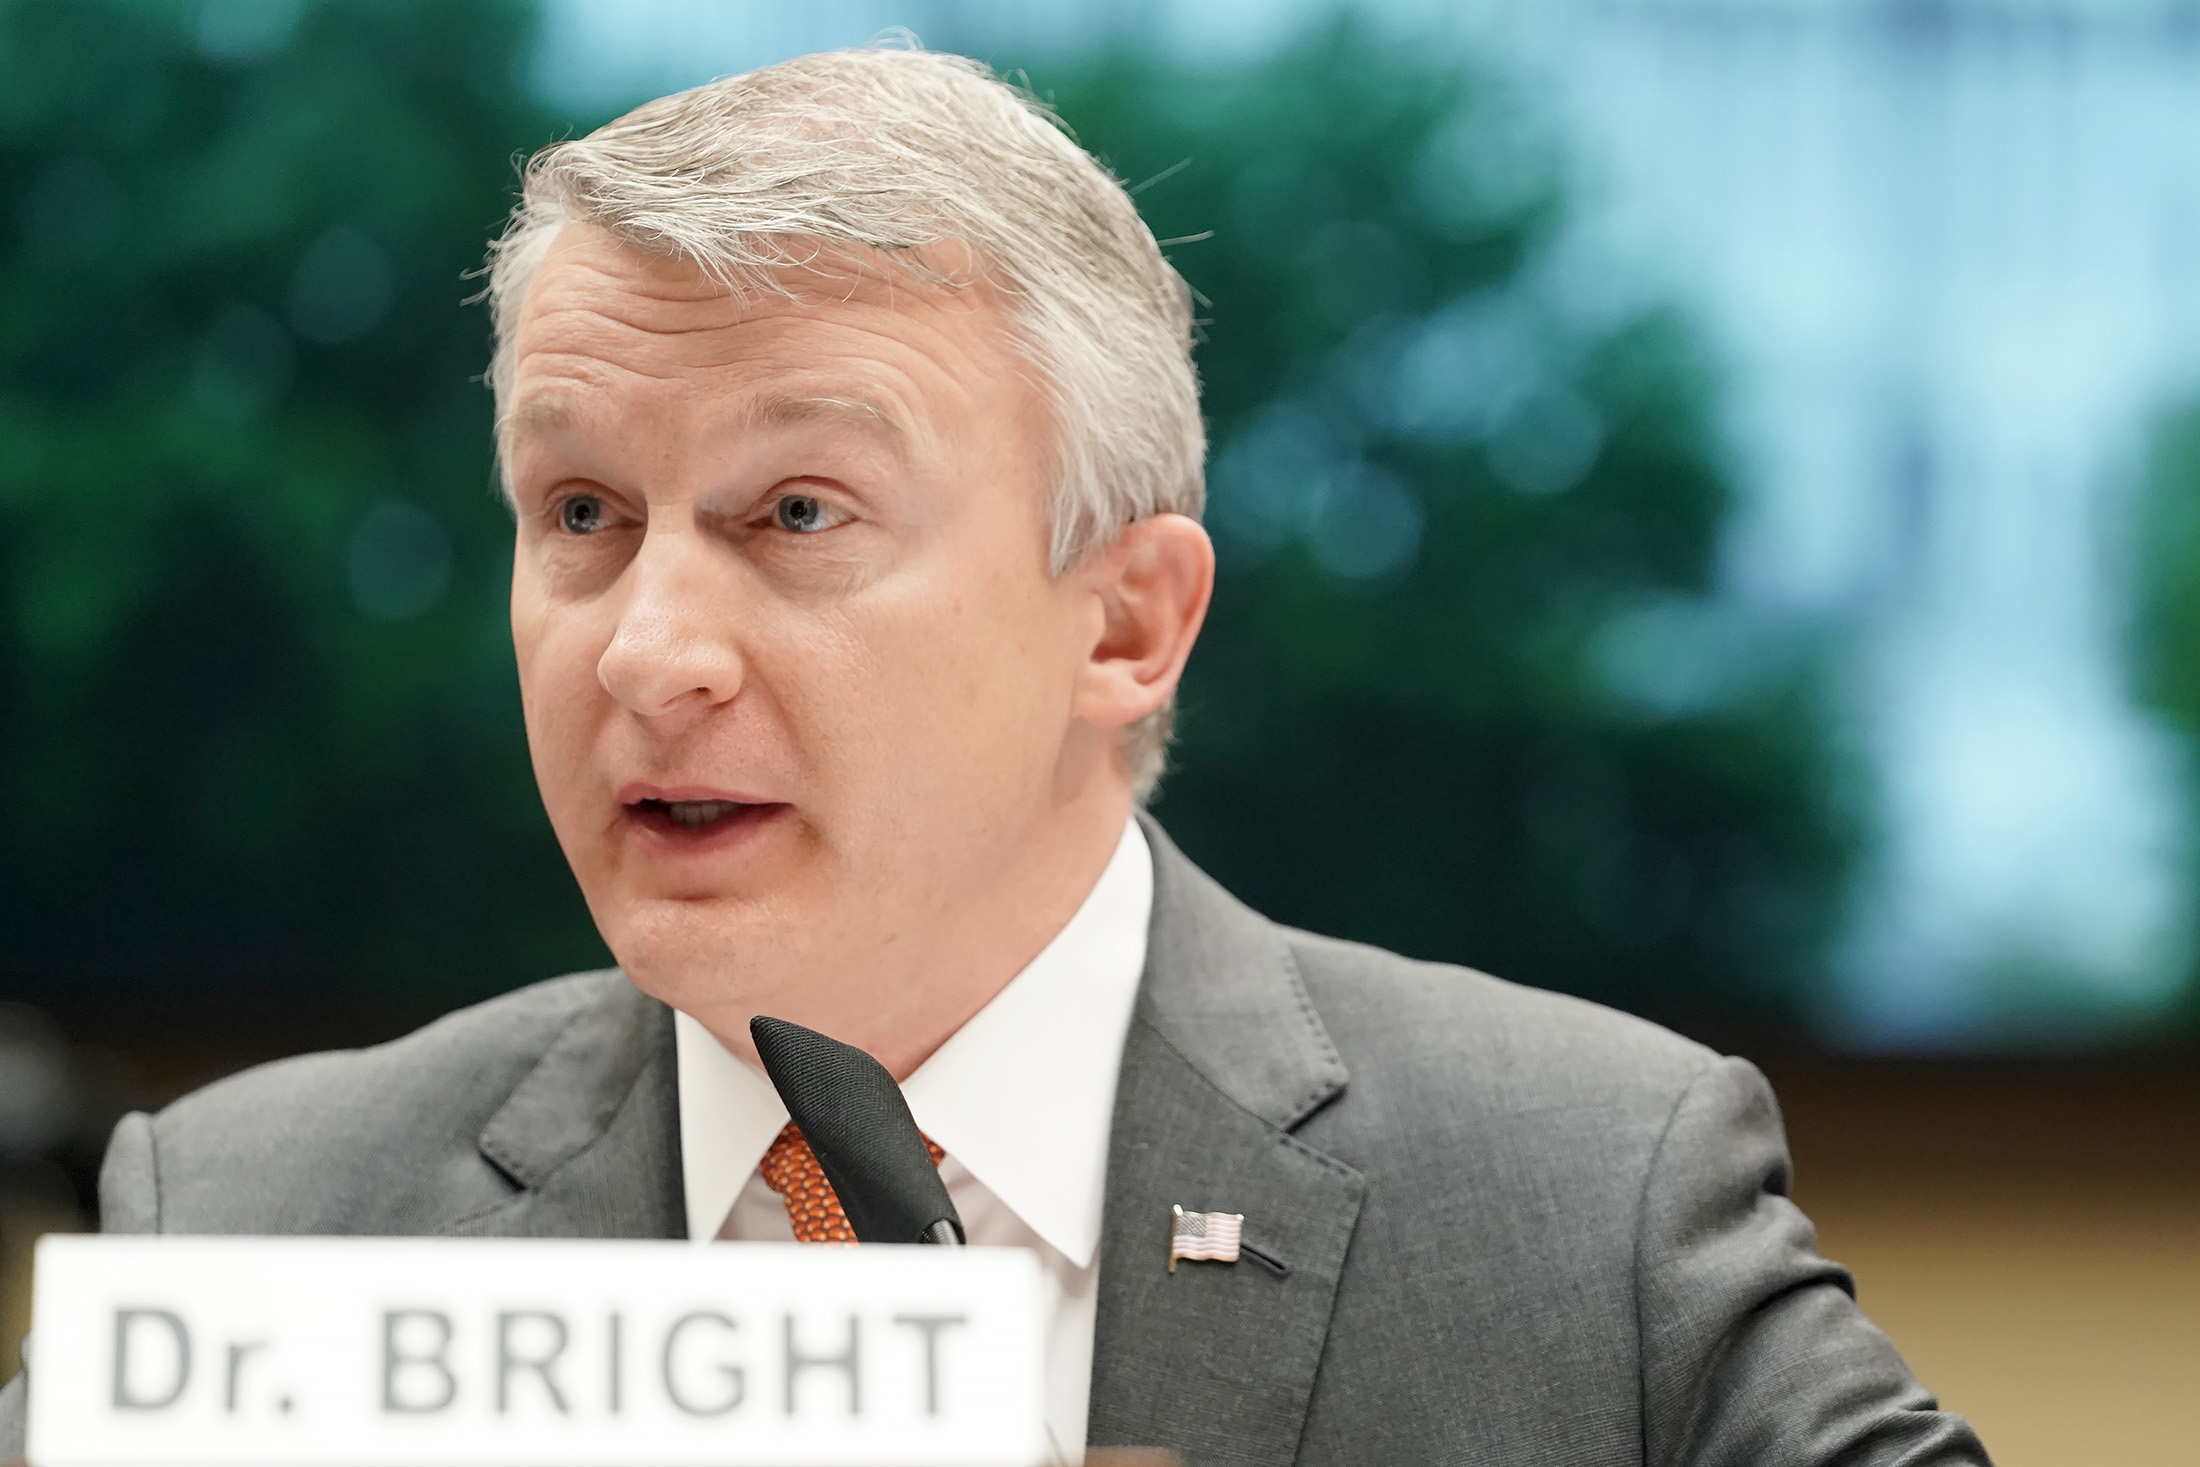 Rick Bright, former director of the Biomedical Advanced Research and Development Authority, testifies during a hearing in Washington, DC, on Thursday, May 14.  